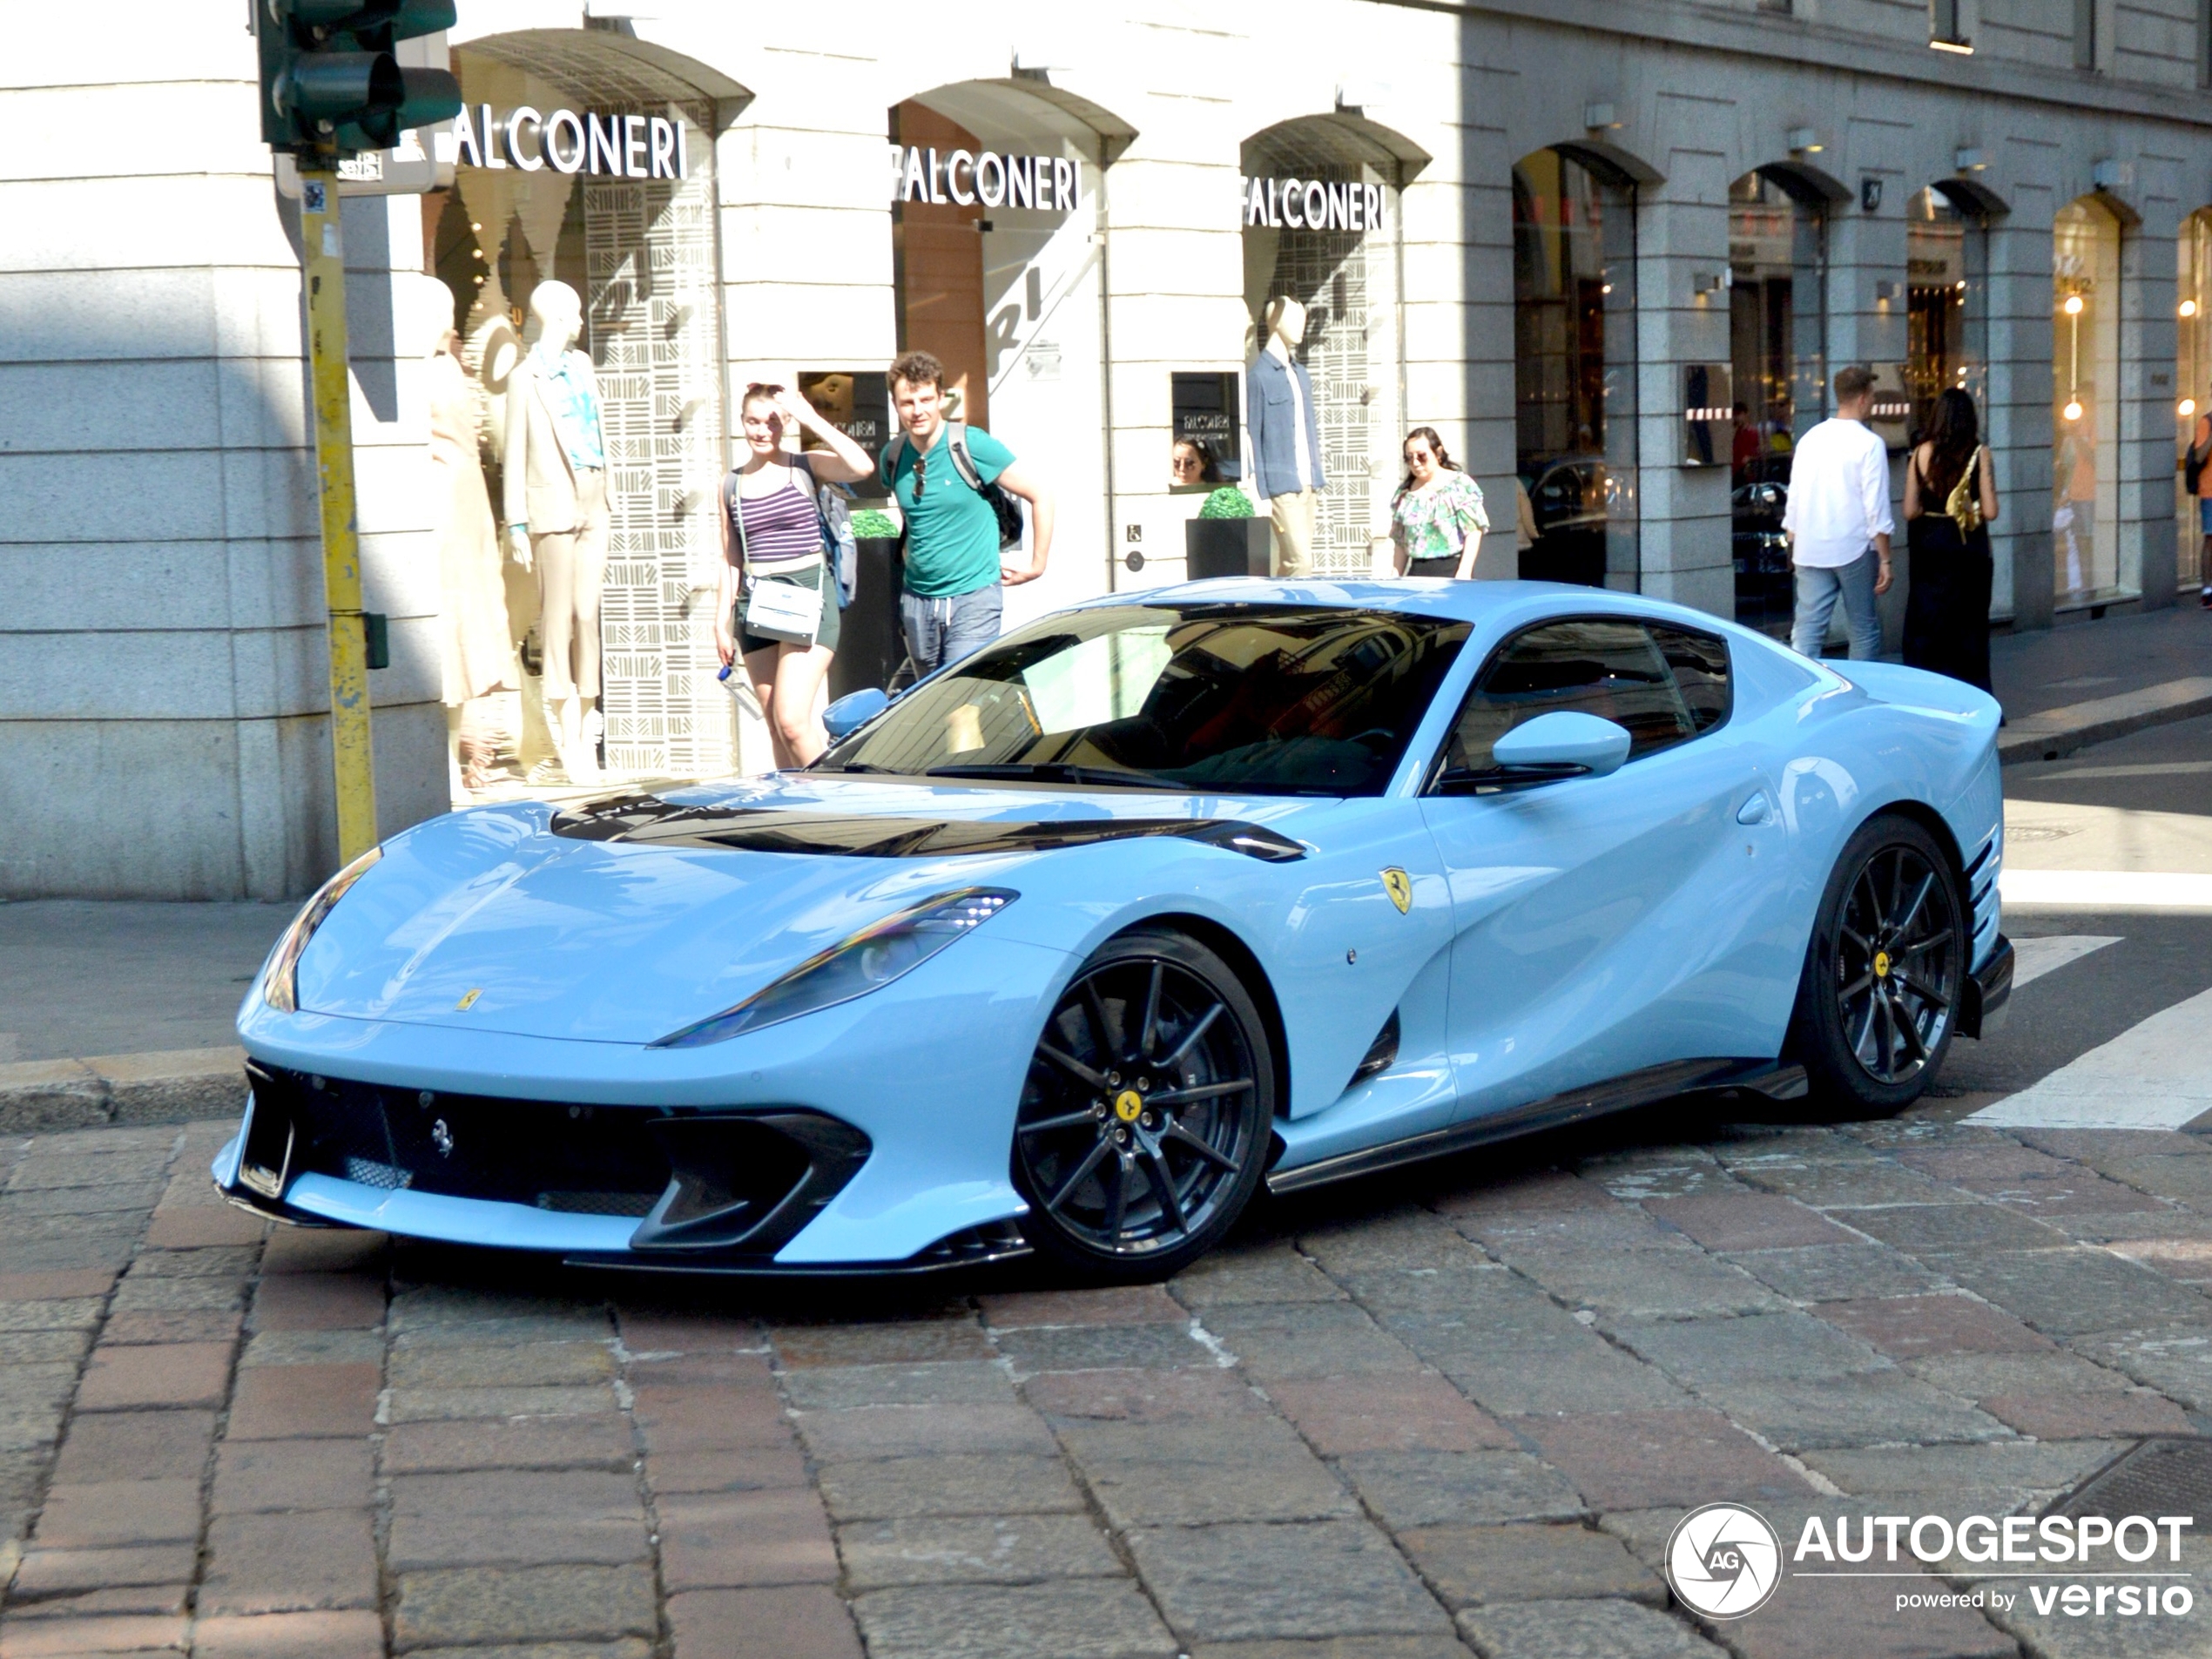 A 812 Competitione shows up in Milan